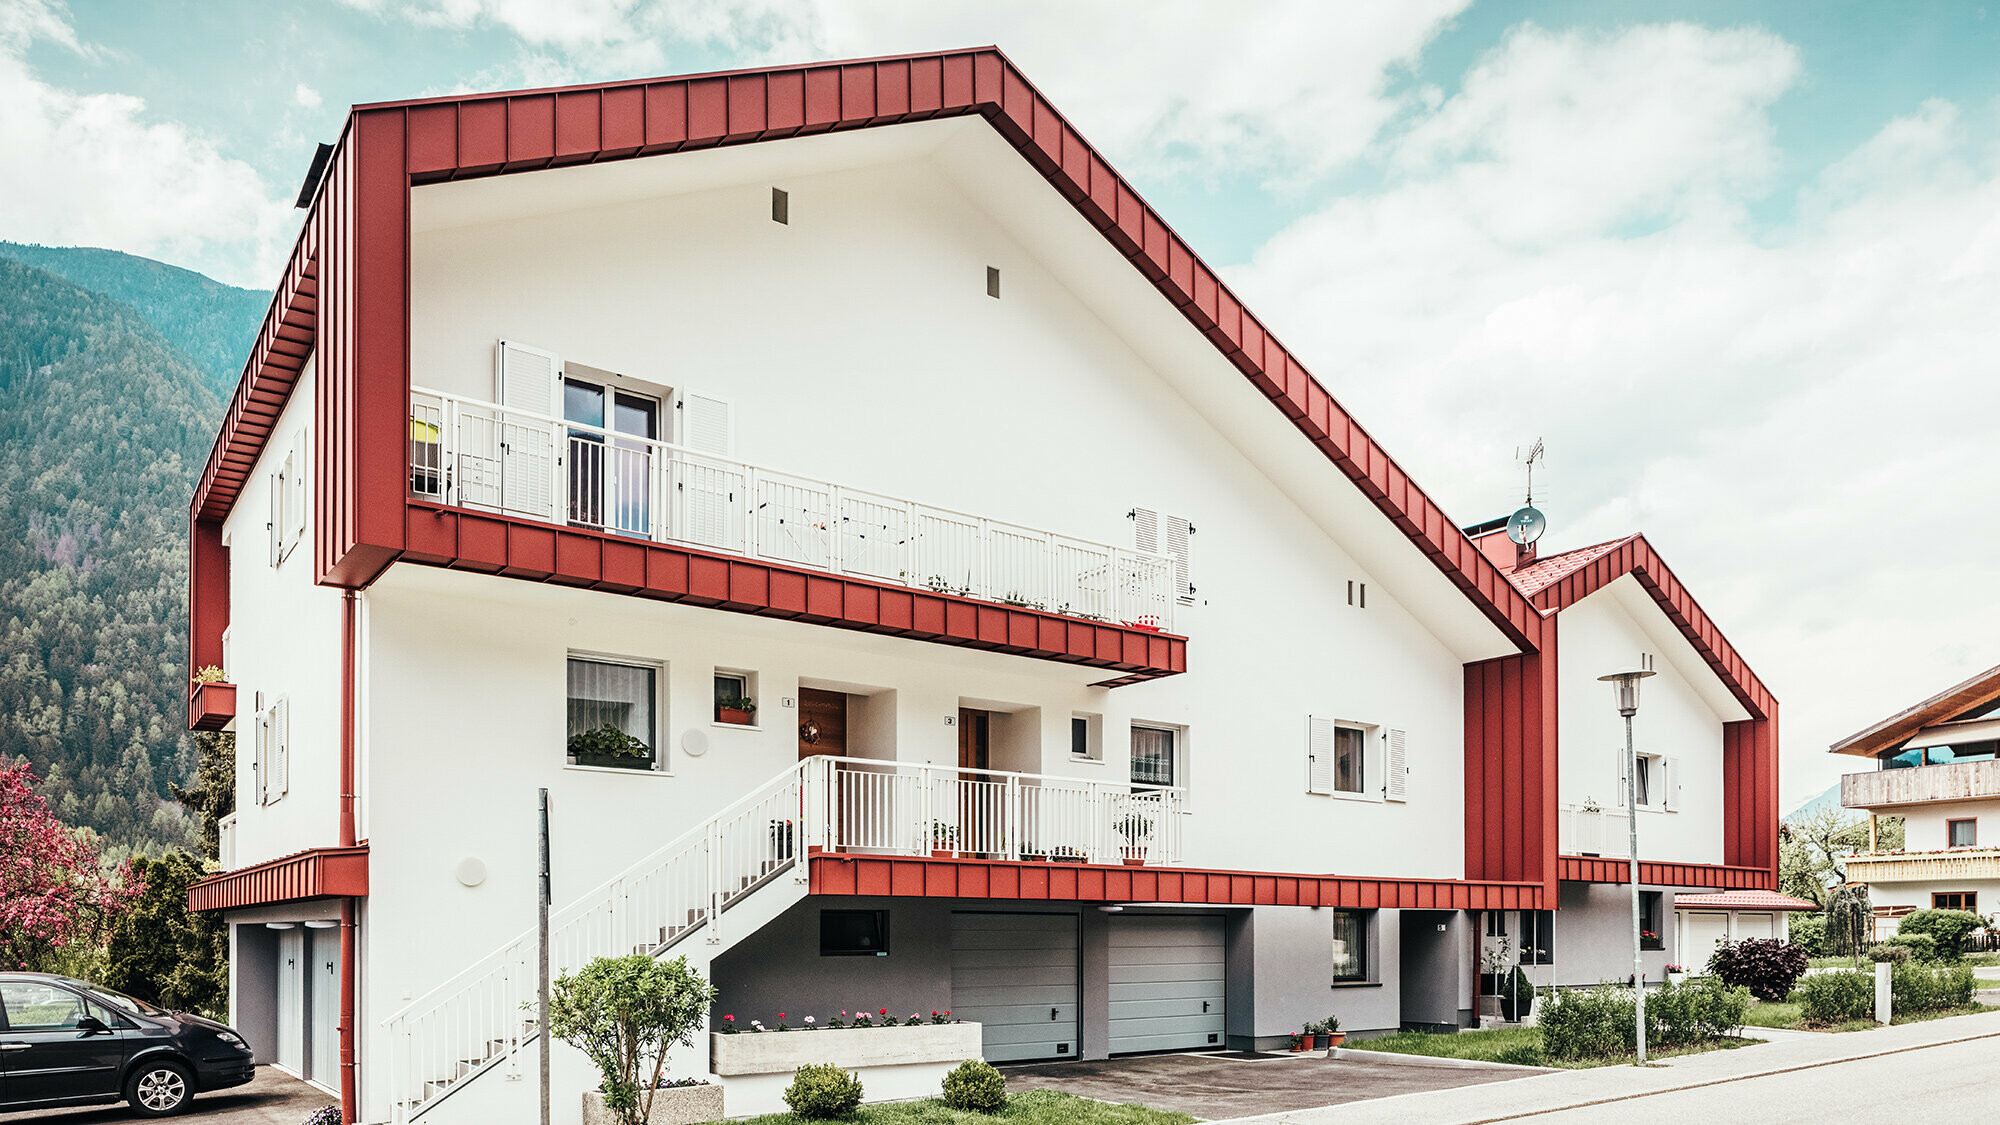 After photo of the residential building in Gais: the oxide red roof panel frames the two adjoining residential buildings.